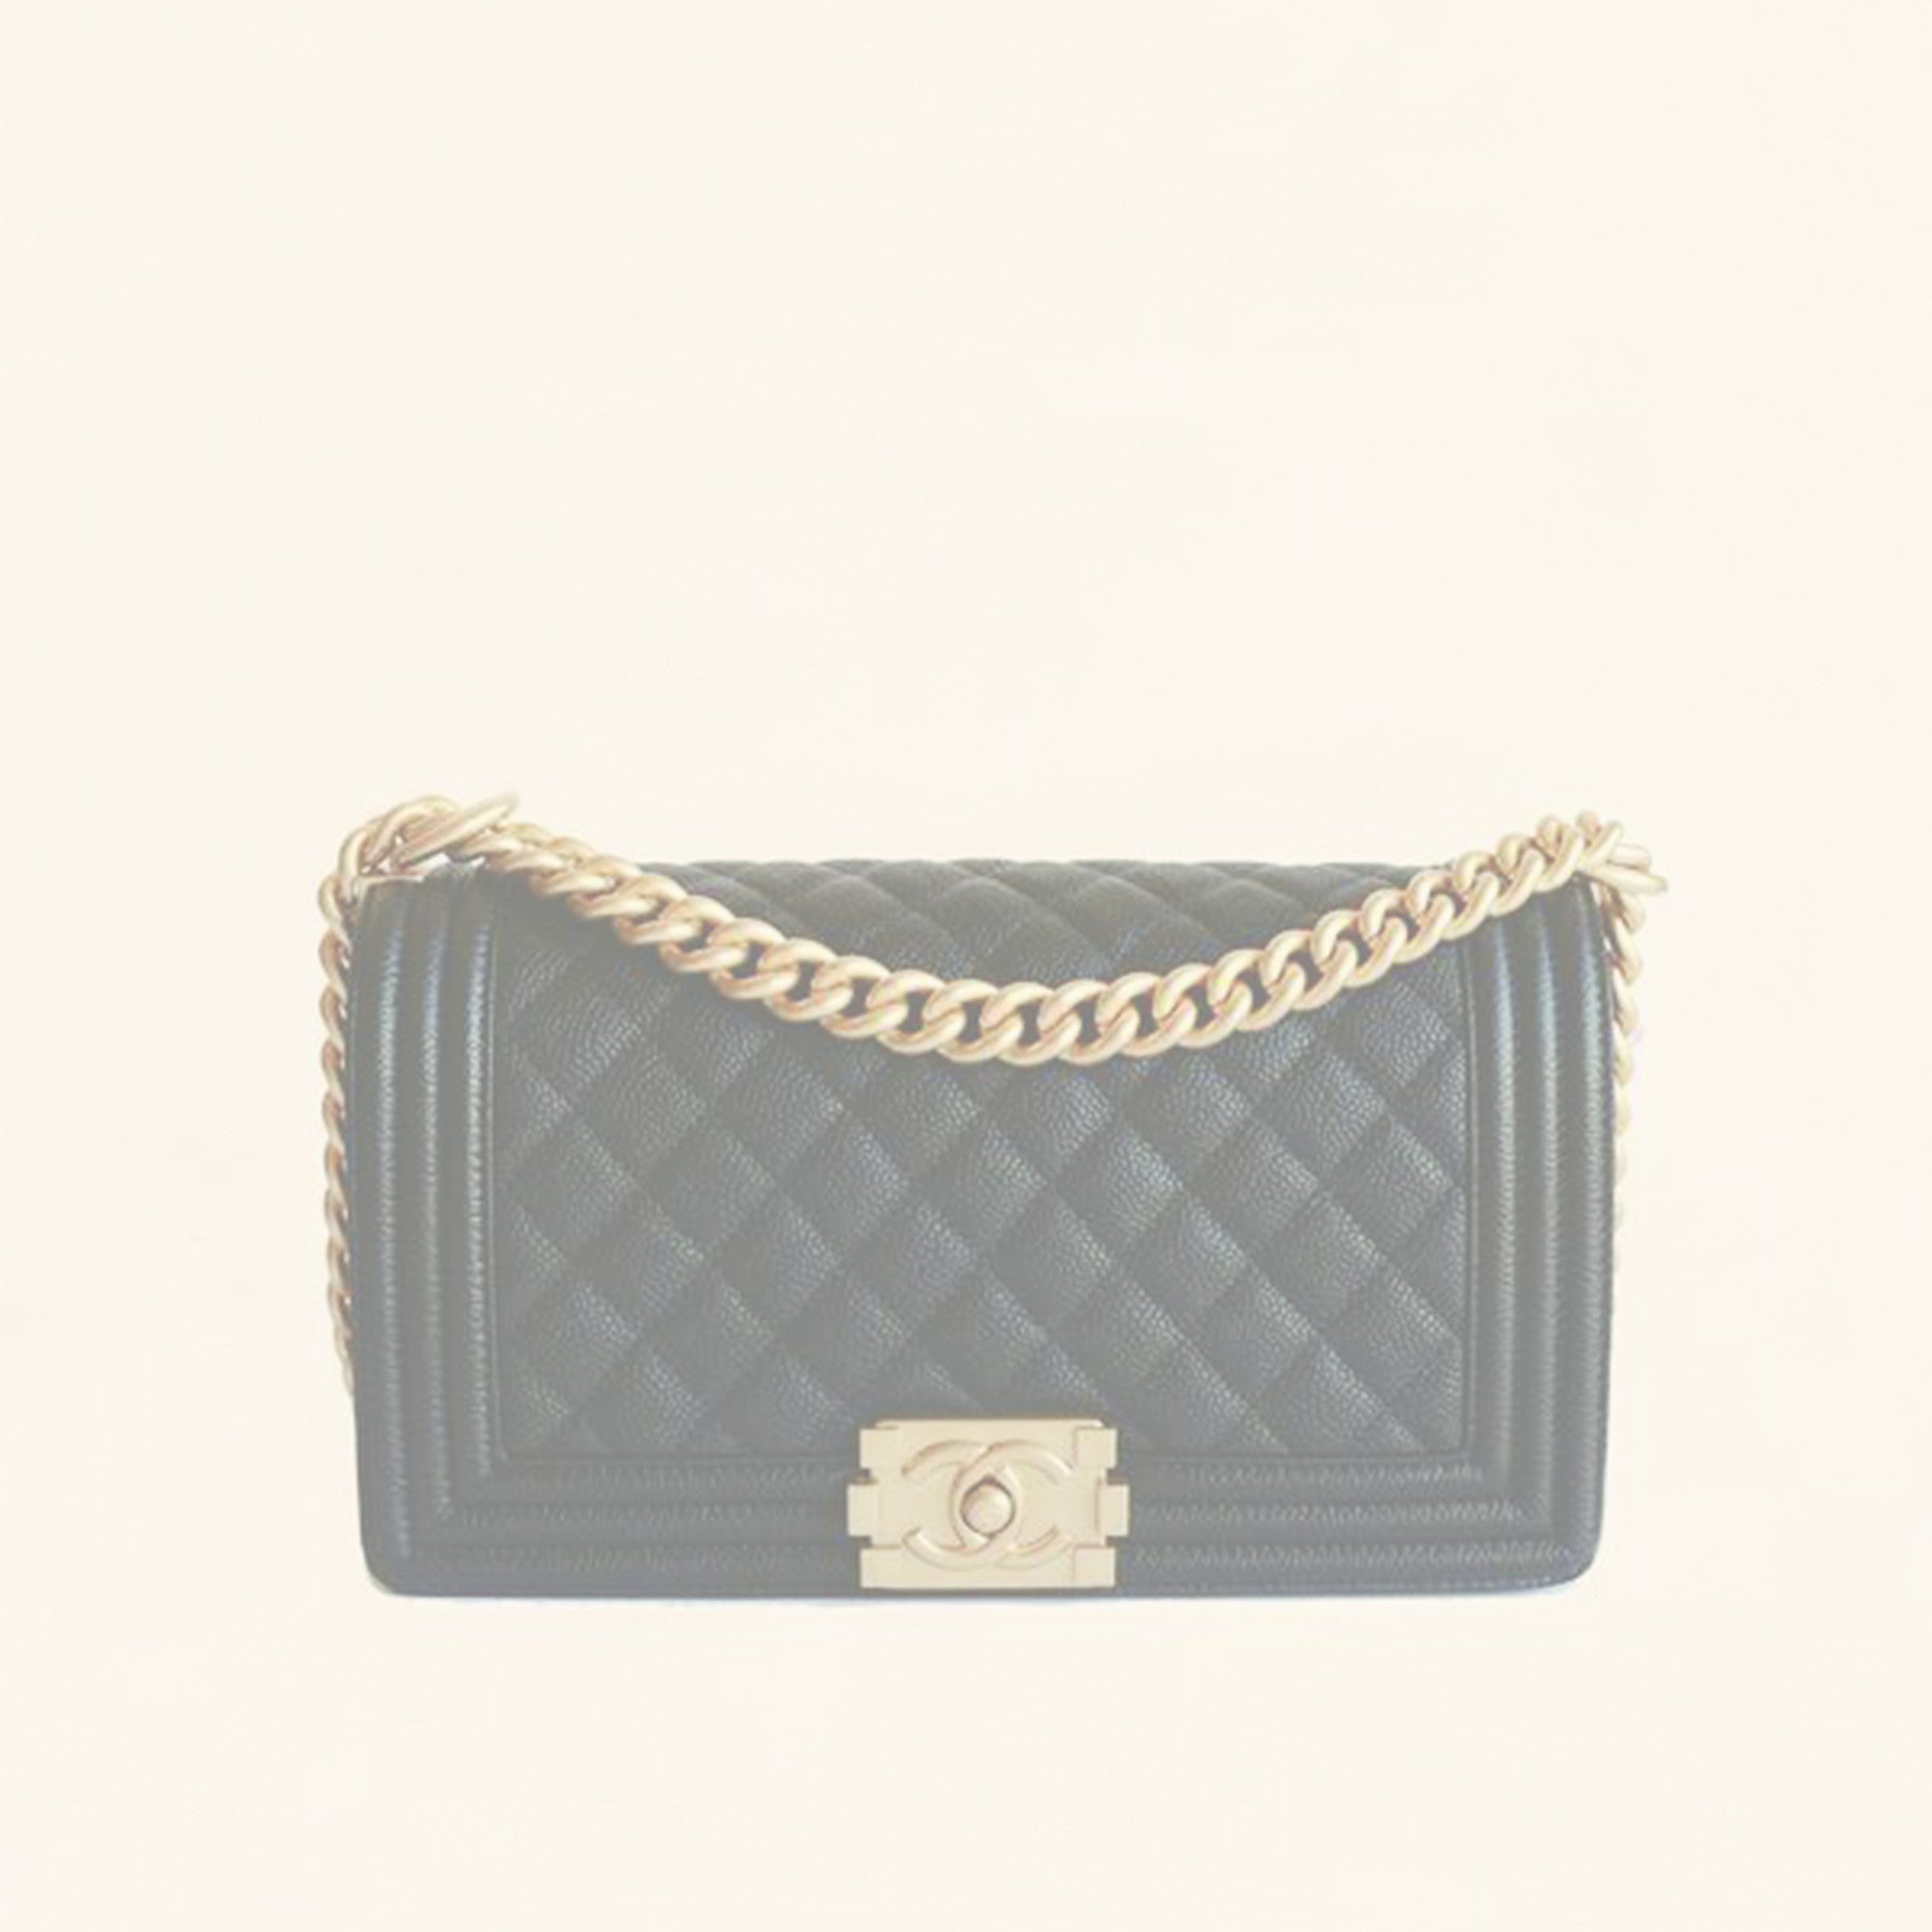 Chanel Classic Flap Bag: Lambskin or Caviar, Investment or Not